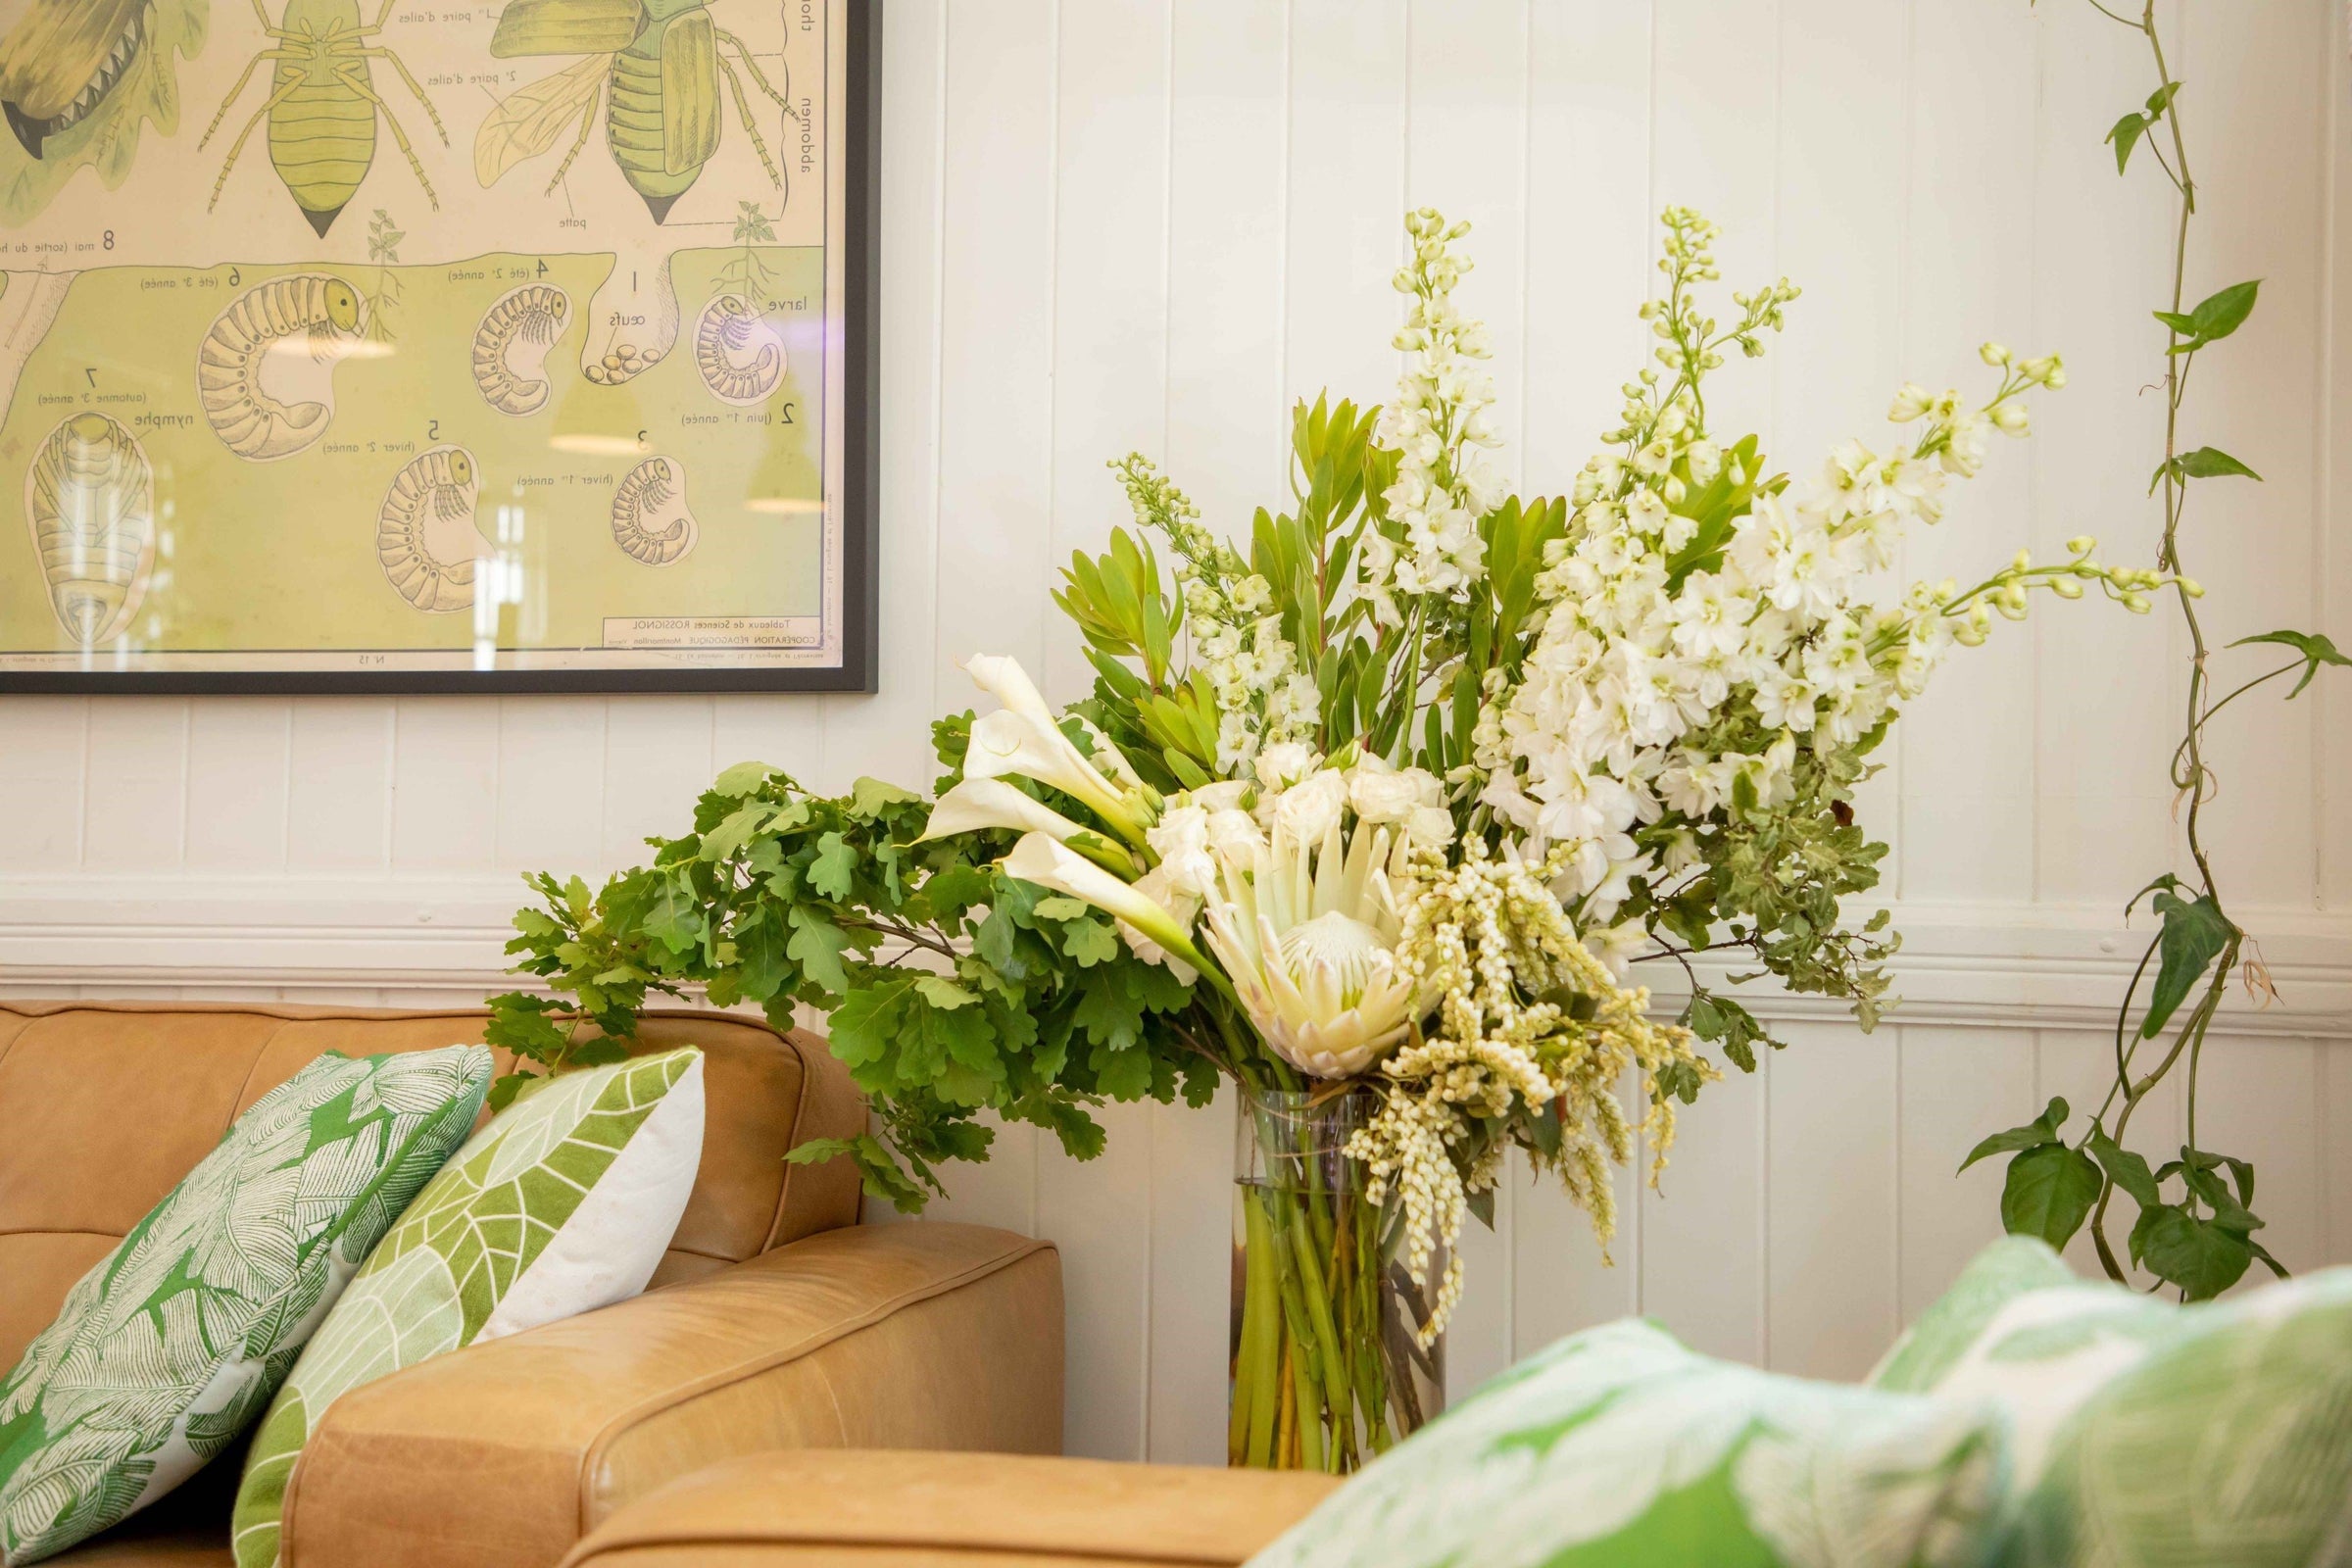 Large glass vase arrangement filled with white and green flowers and foliage placed in room with tan coloured lather lounges